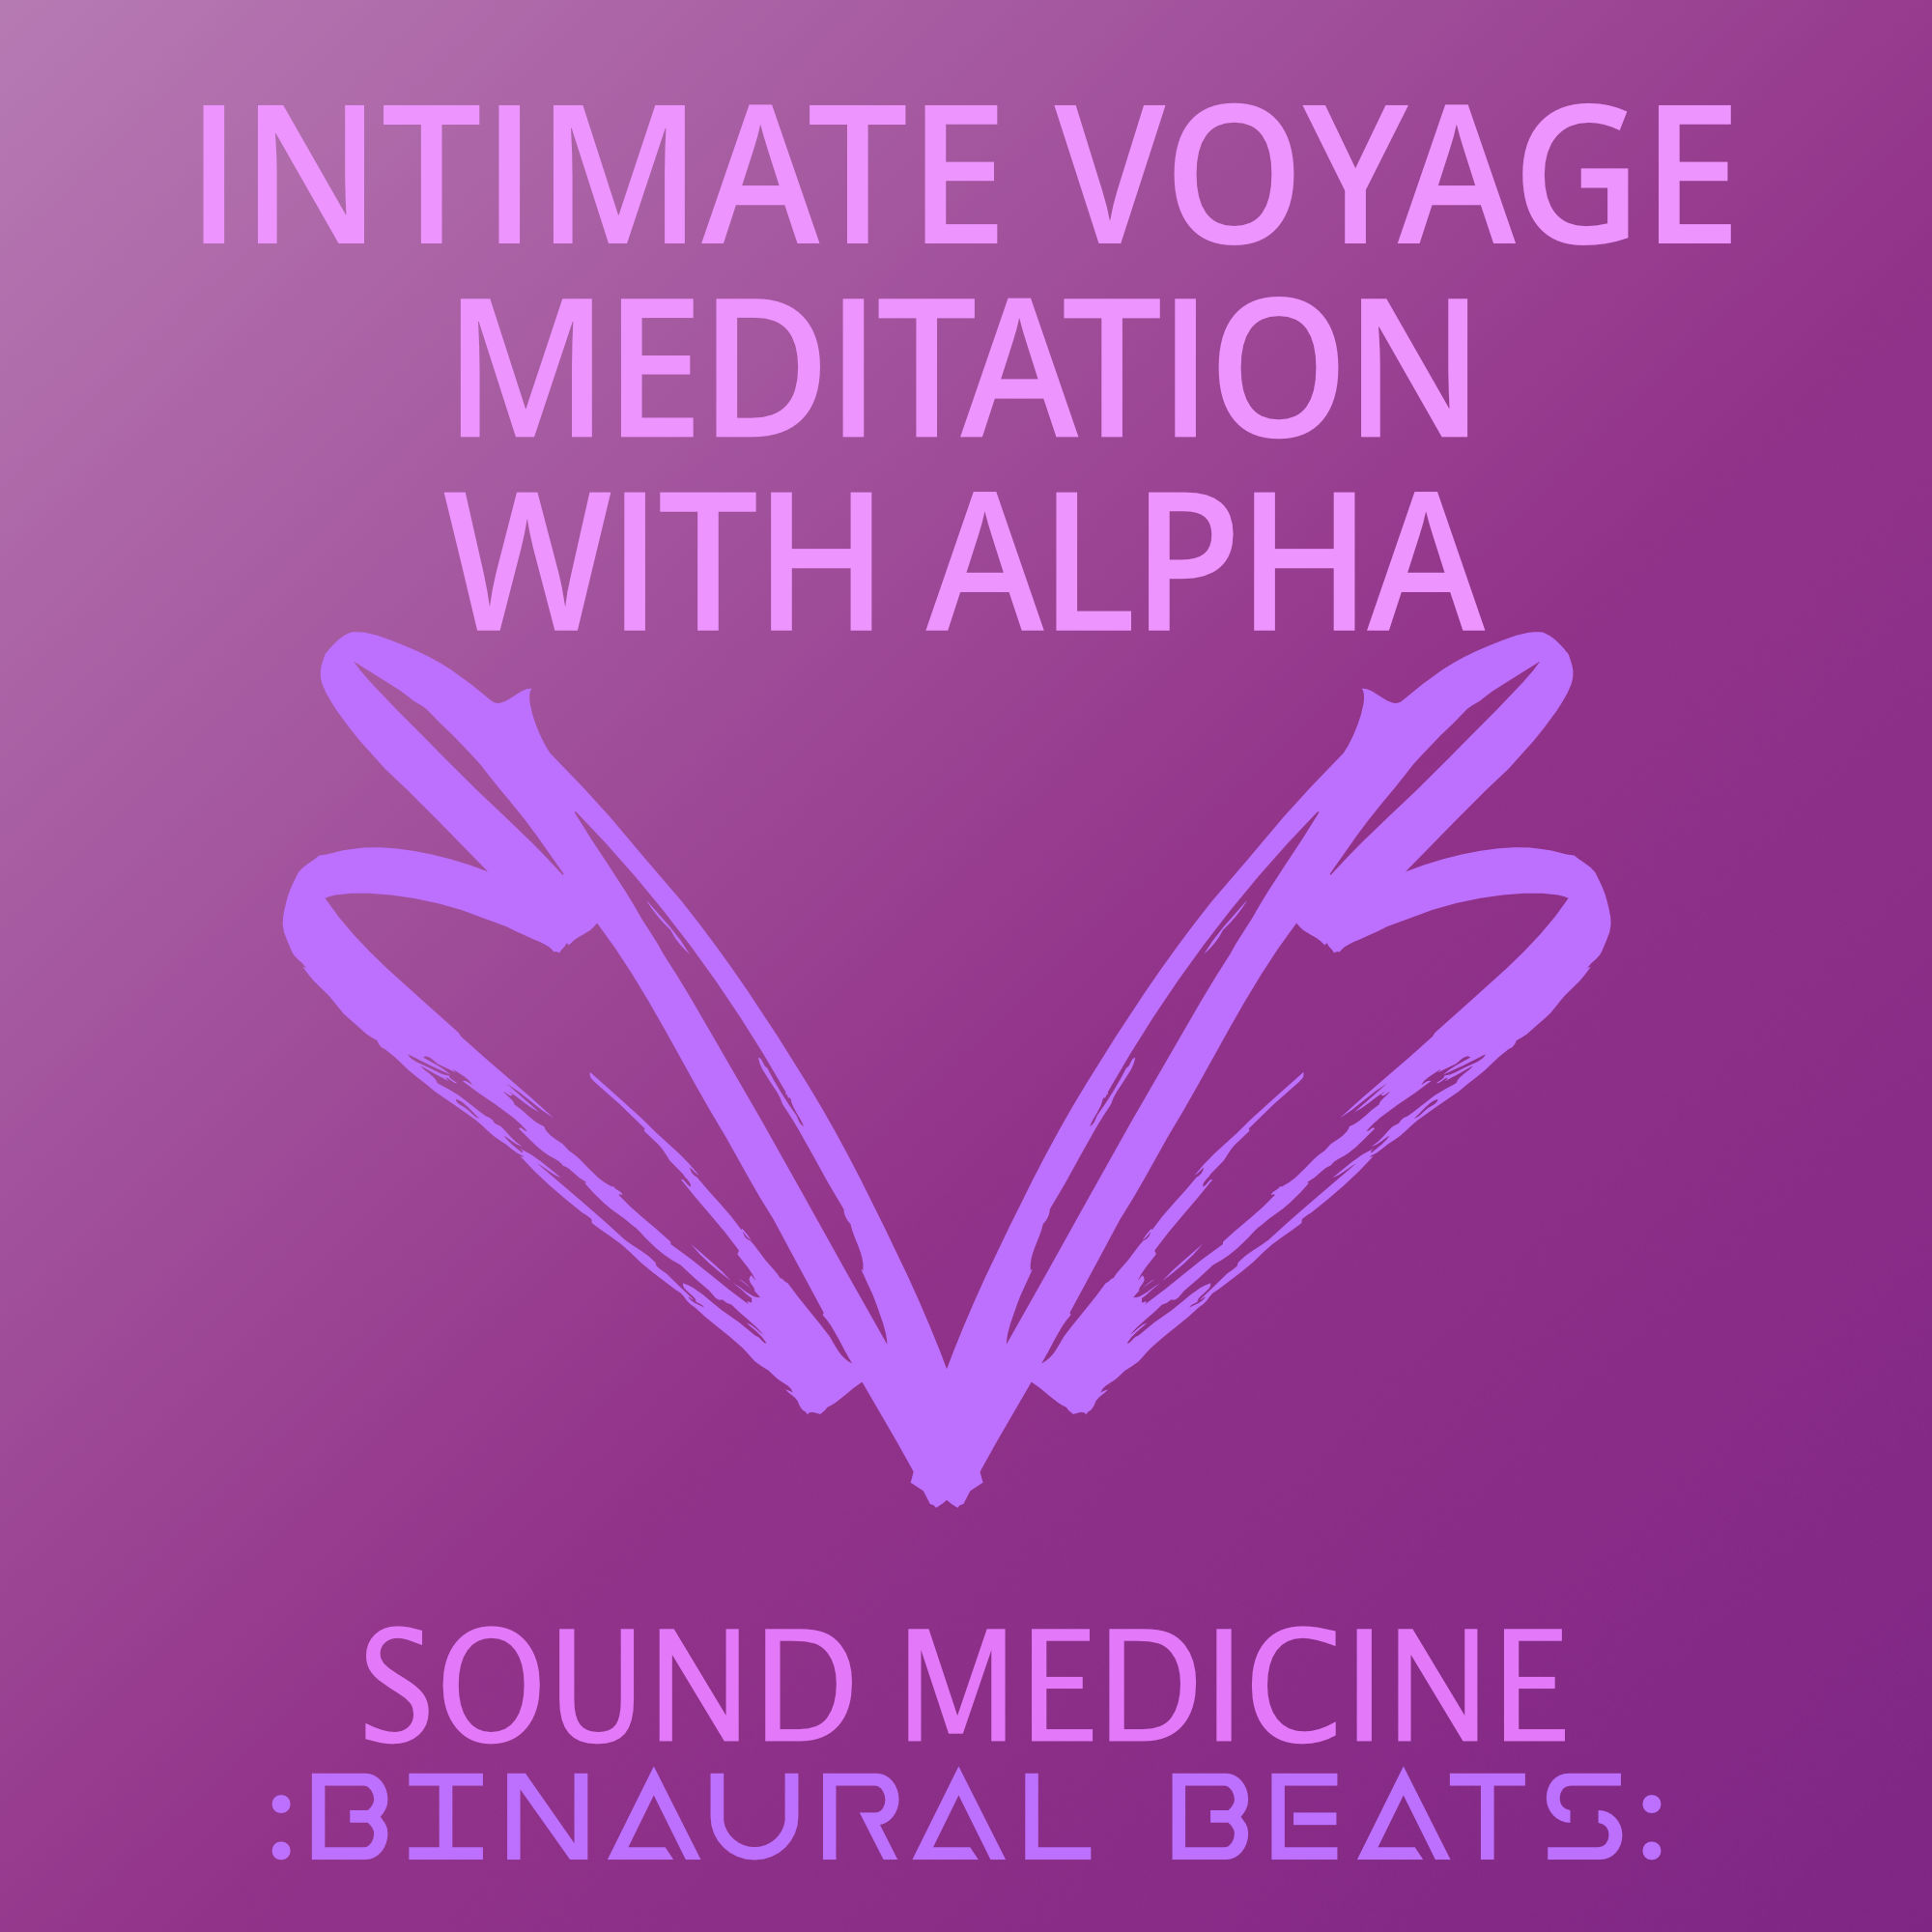 Intimate Voyage Meditation with Alpha